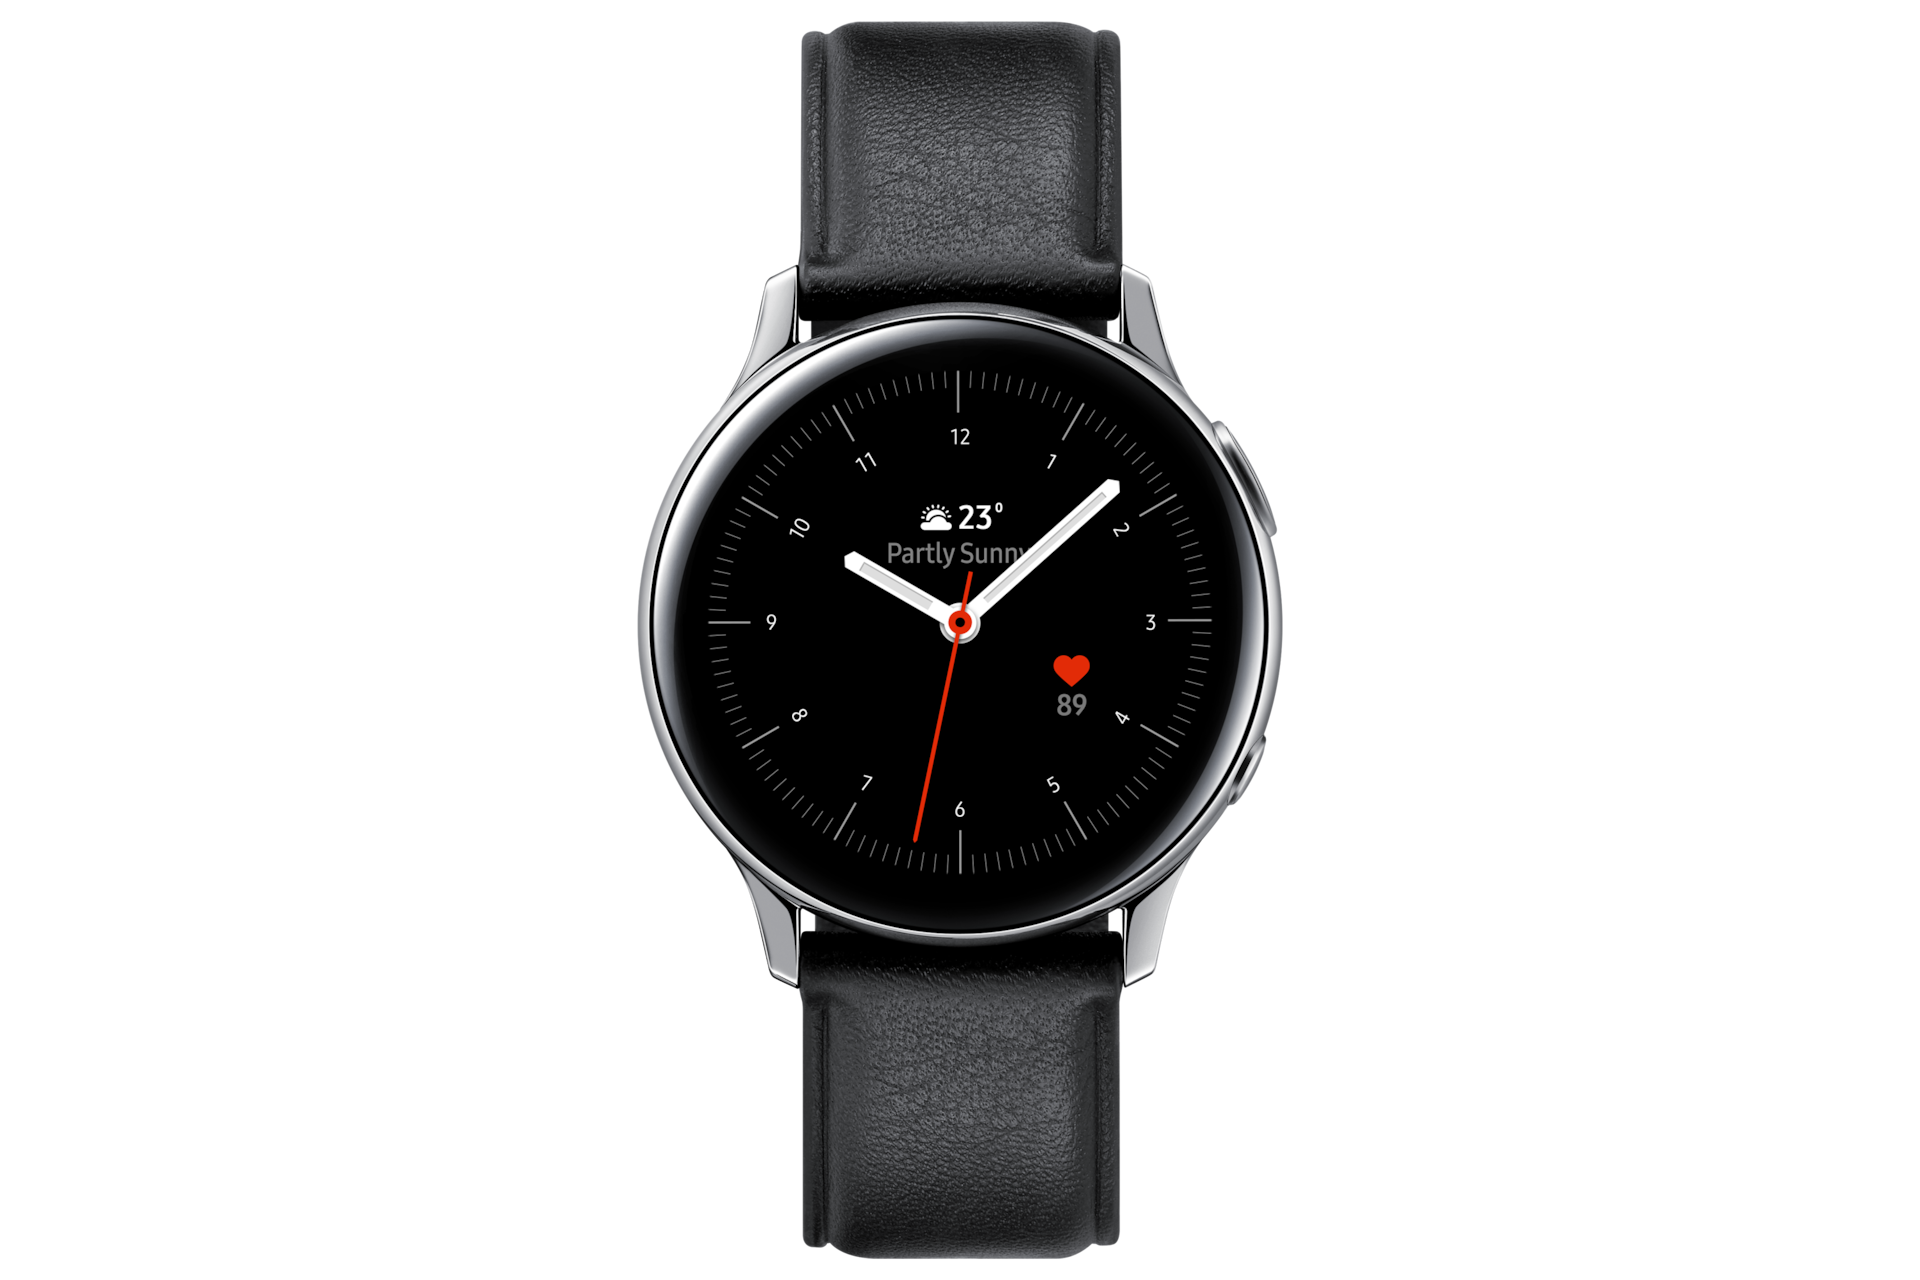 Galaxy watch active 2 price